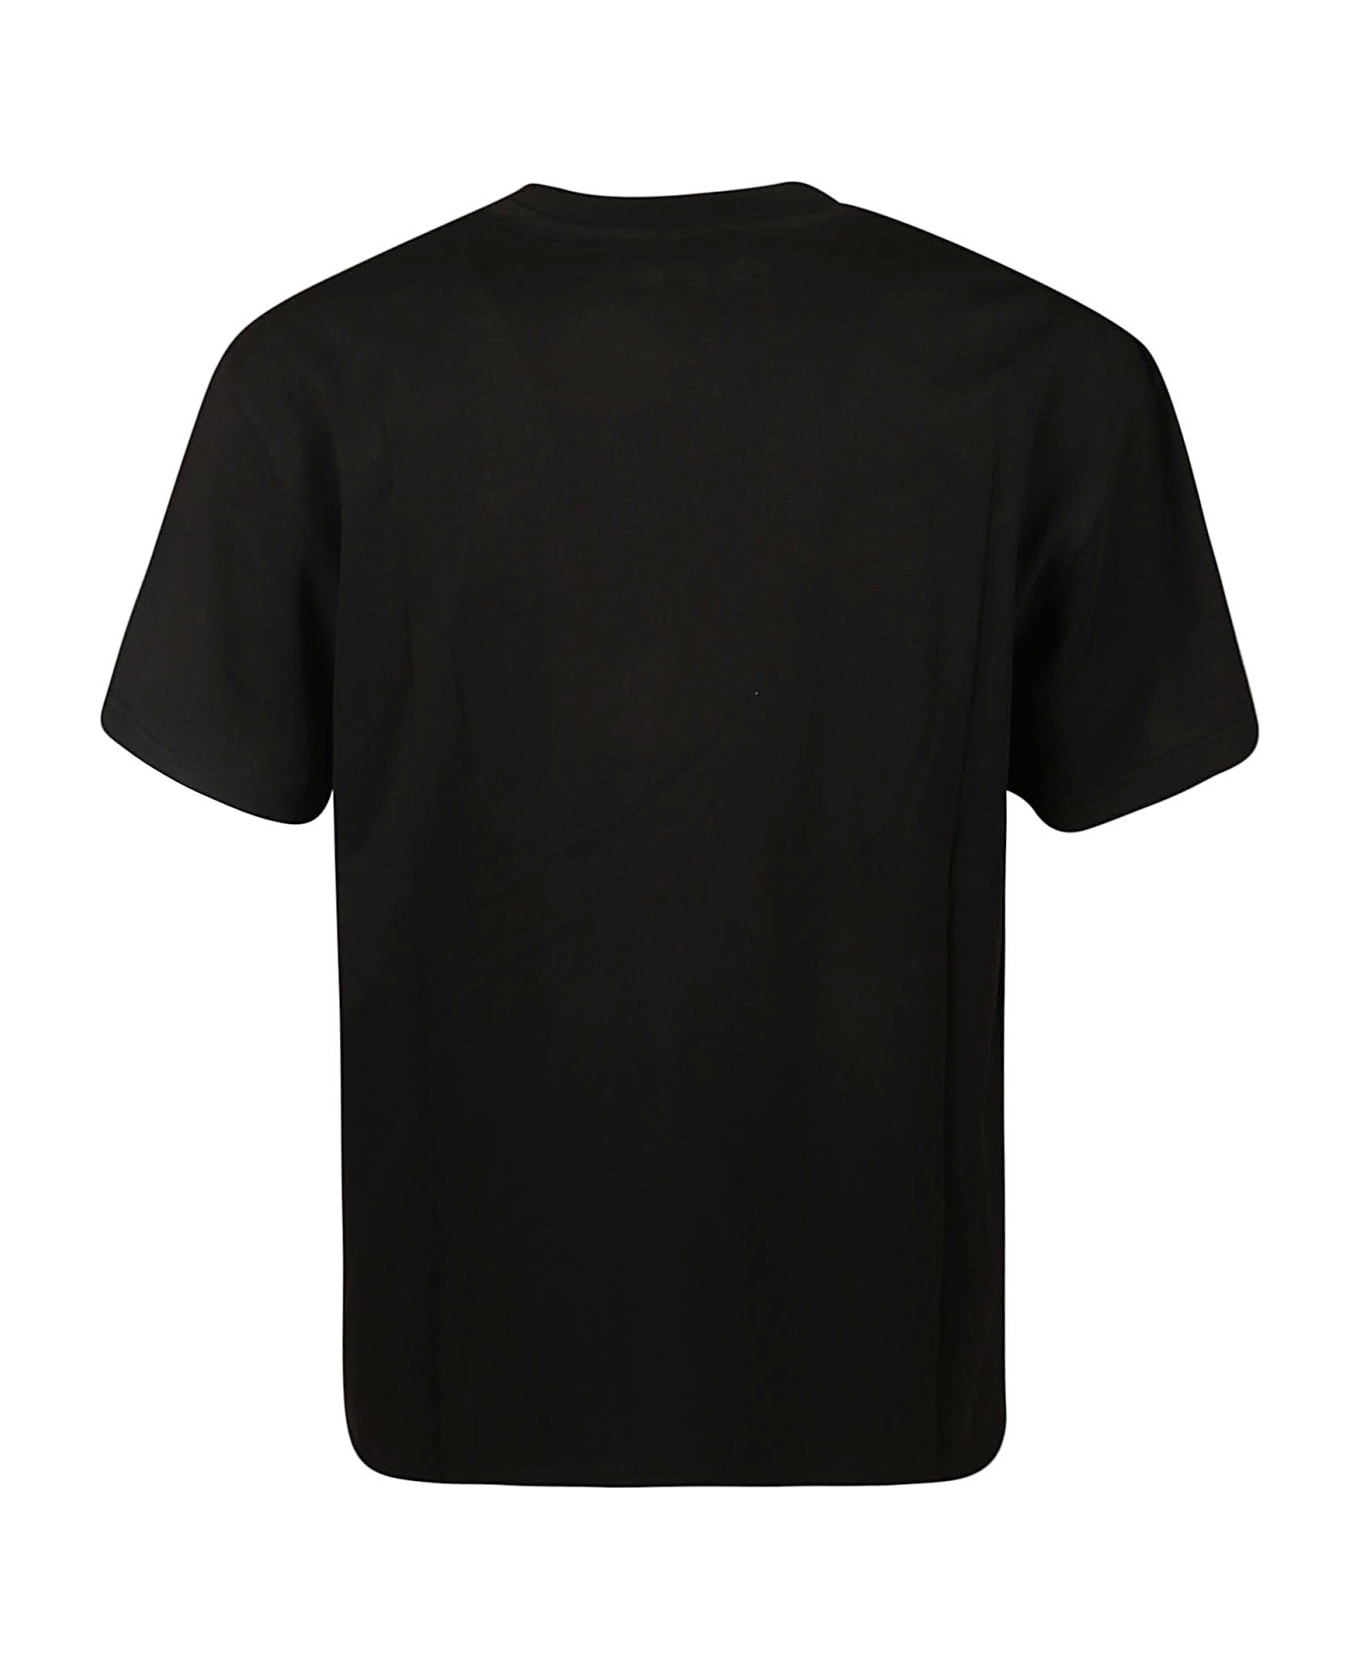 J.W. Anderson Anchor Patch T-shirt - Black